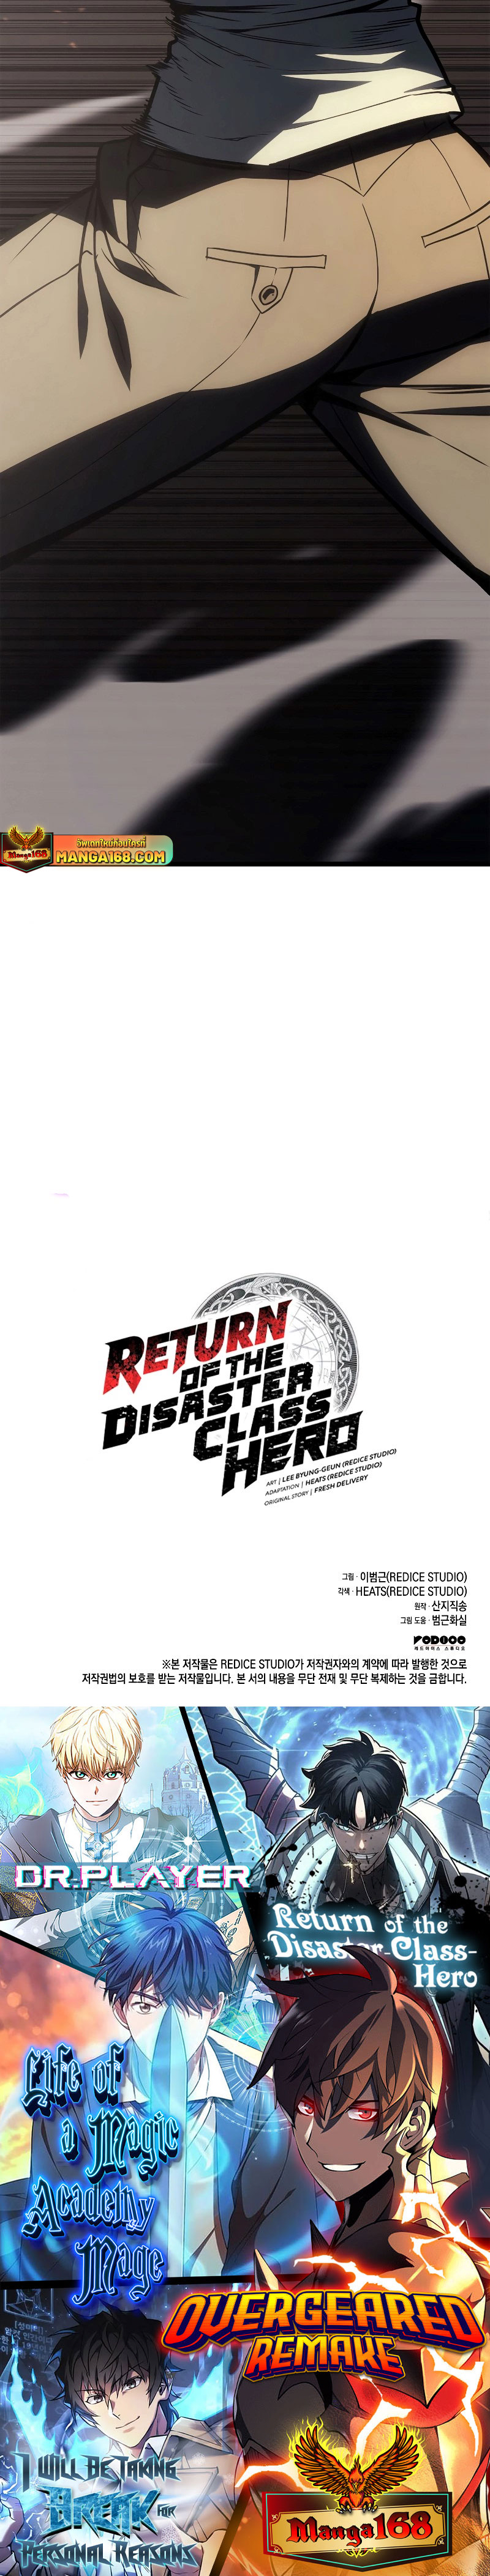 The Return of The Disaster Class Hero77 (40)